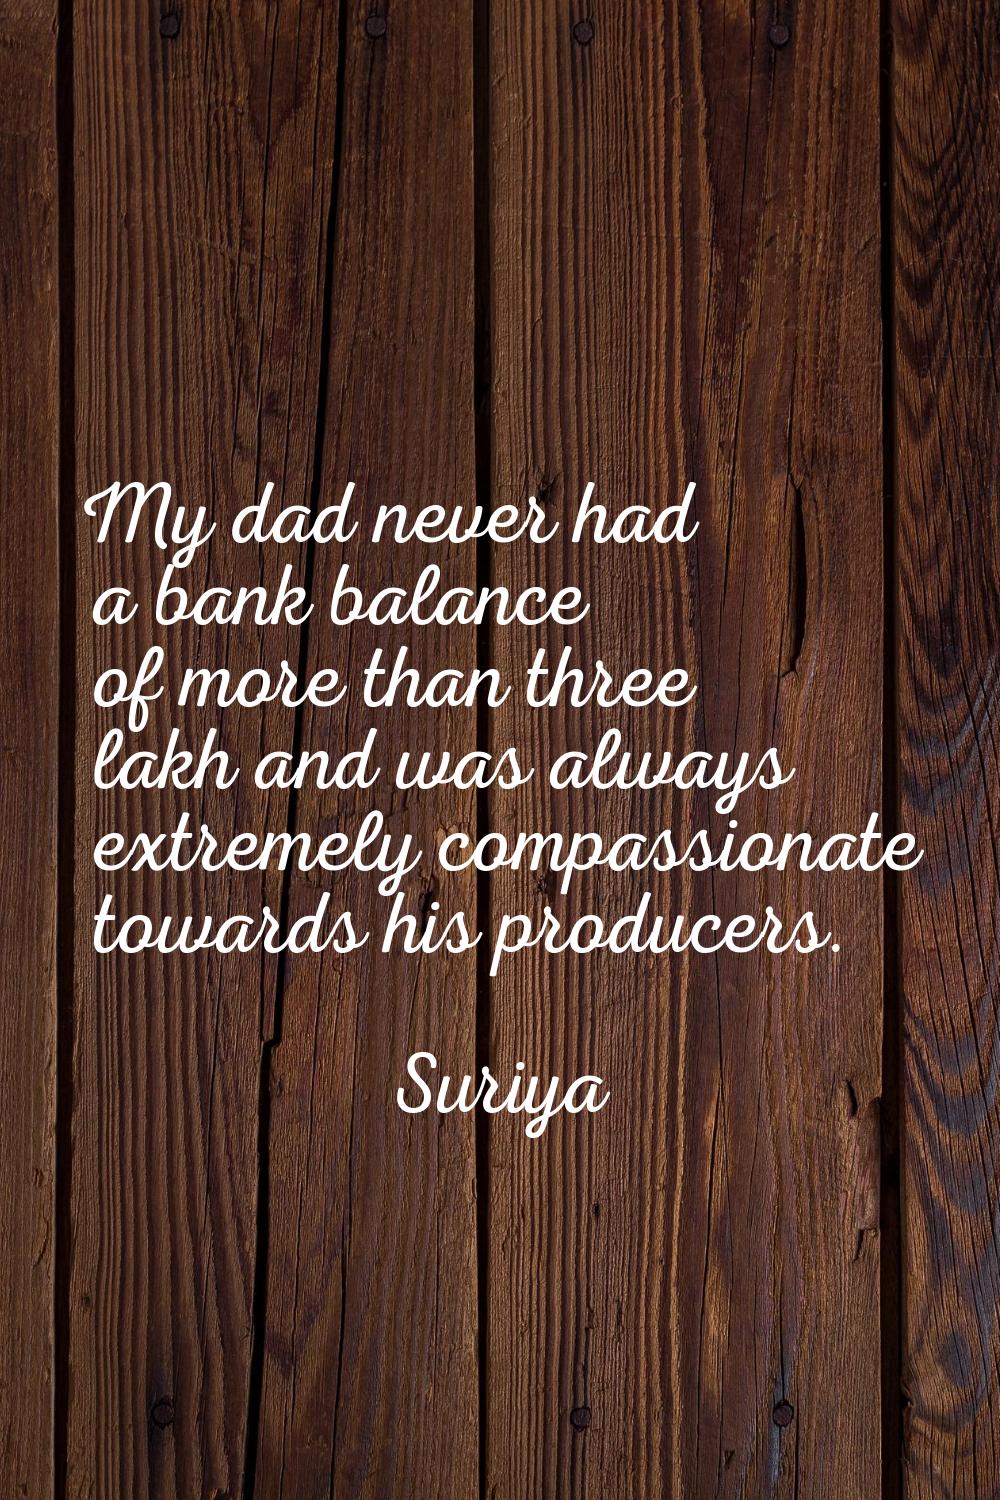 My dad never had a bank balance of more than three lakh and was always extremely compassionate towa